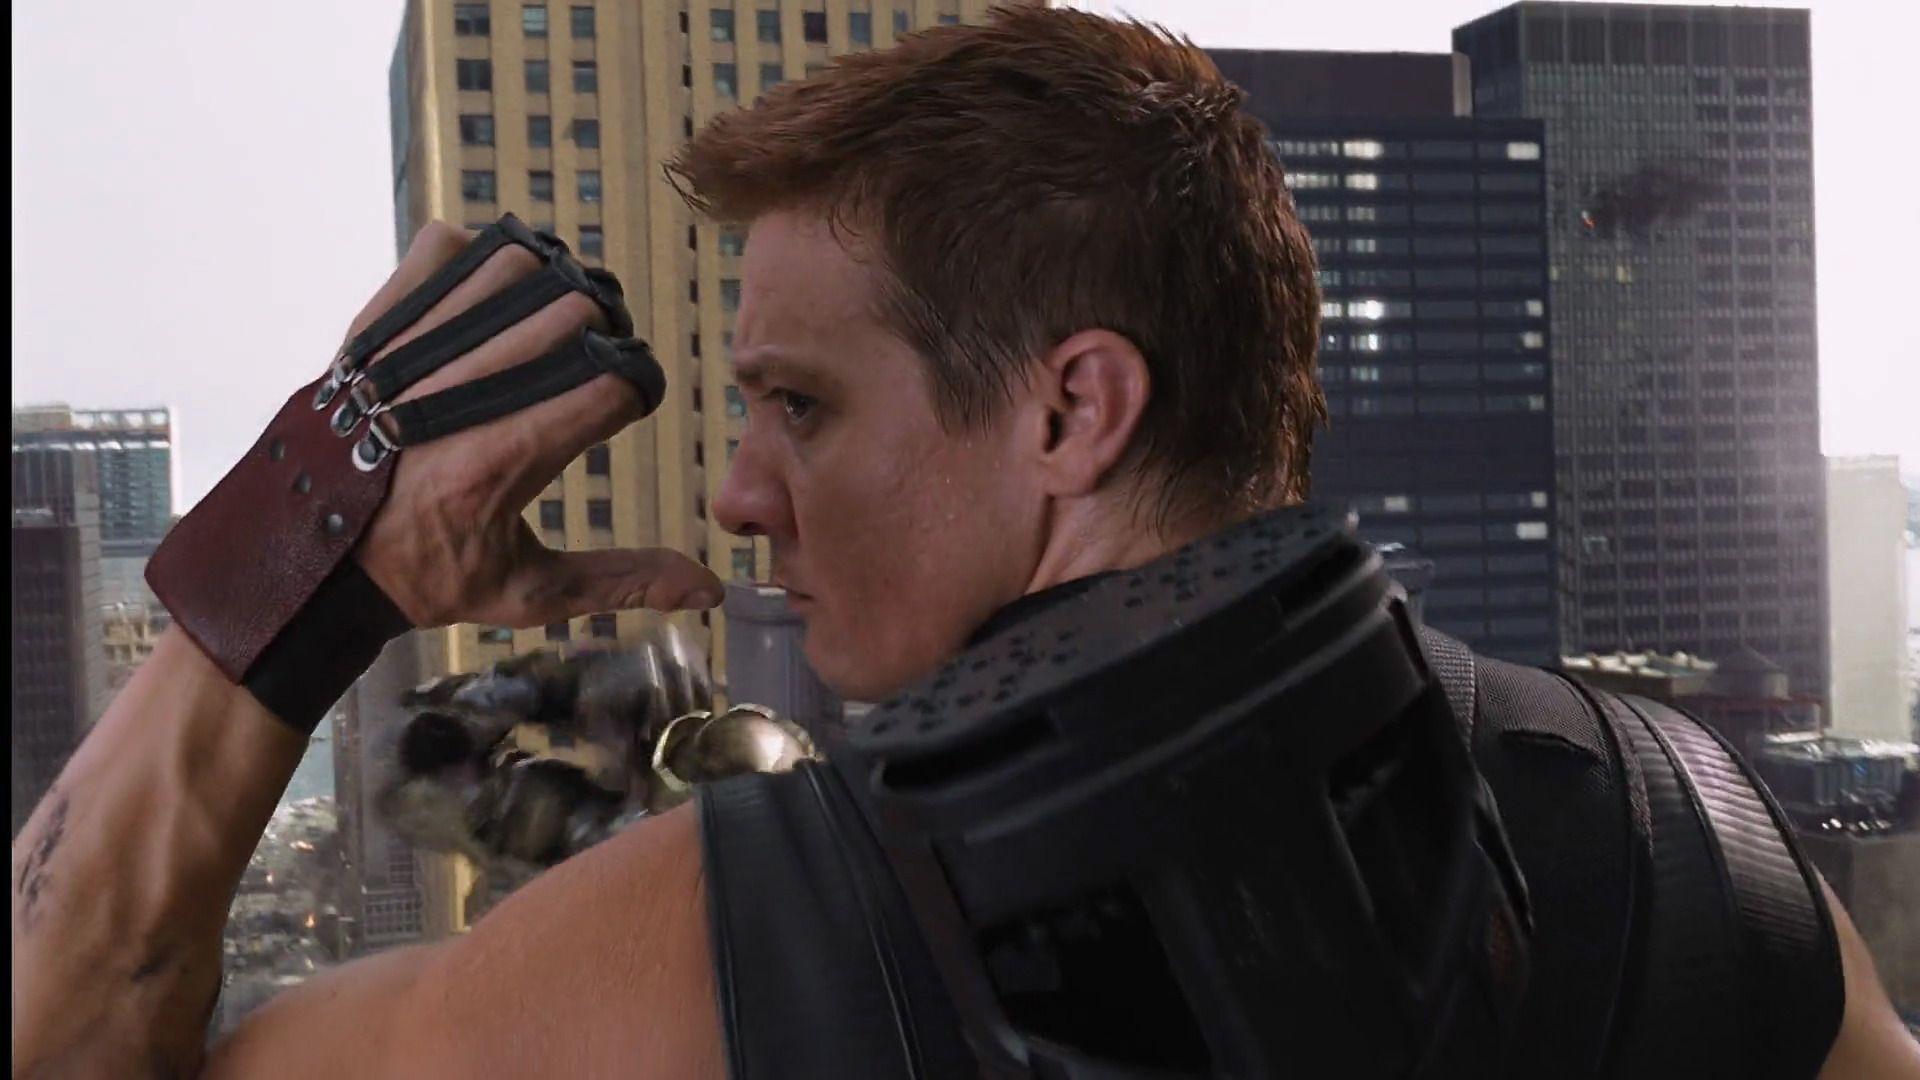 Best image about Hairstyle. Hawkeye, The bourne